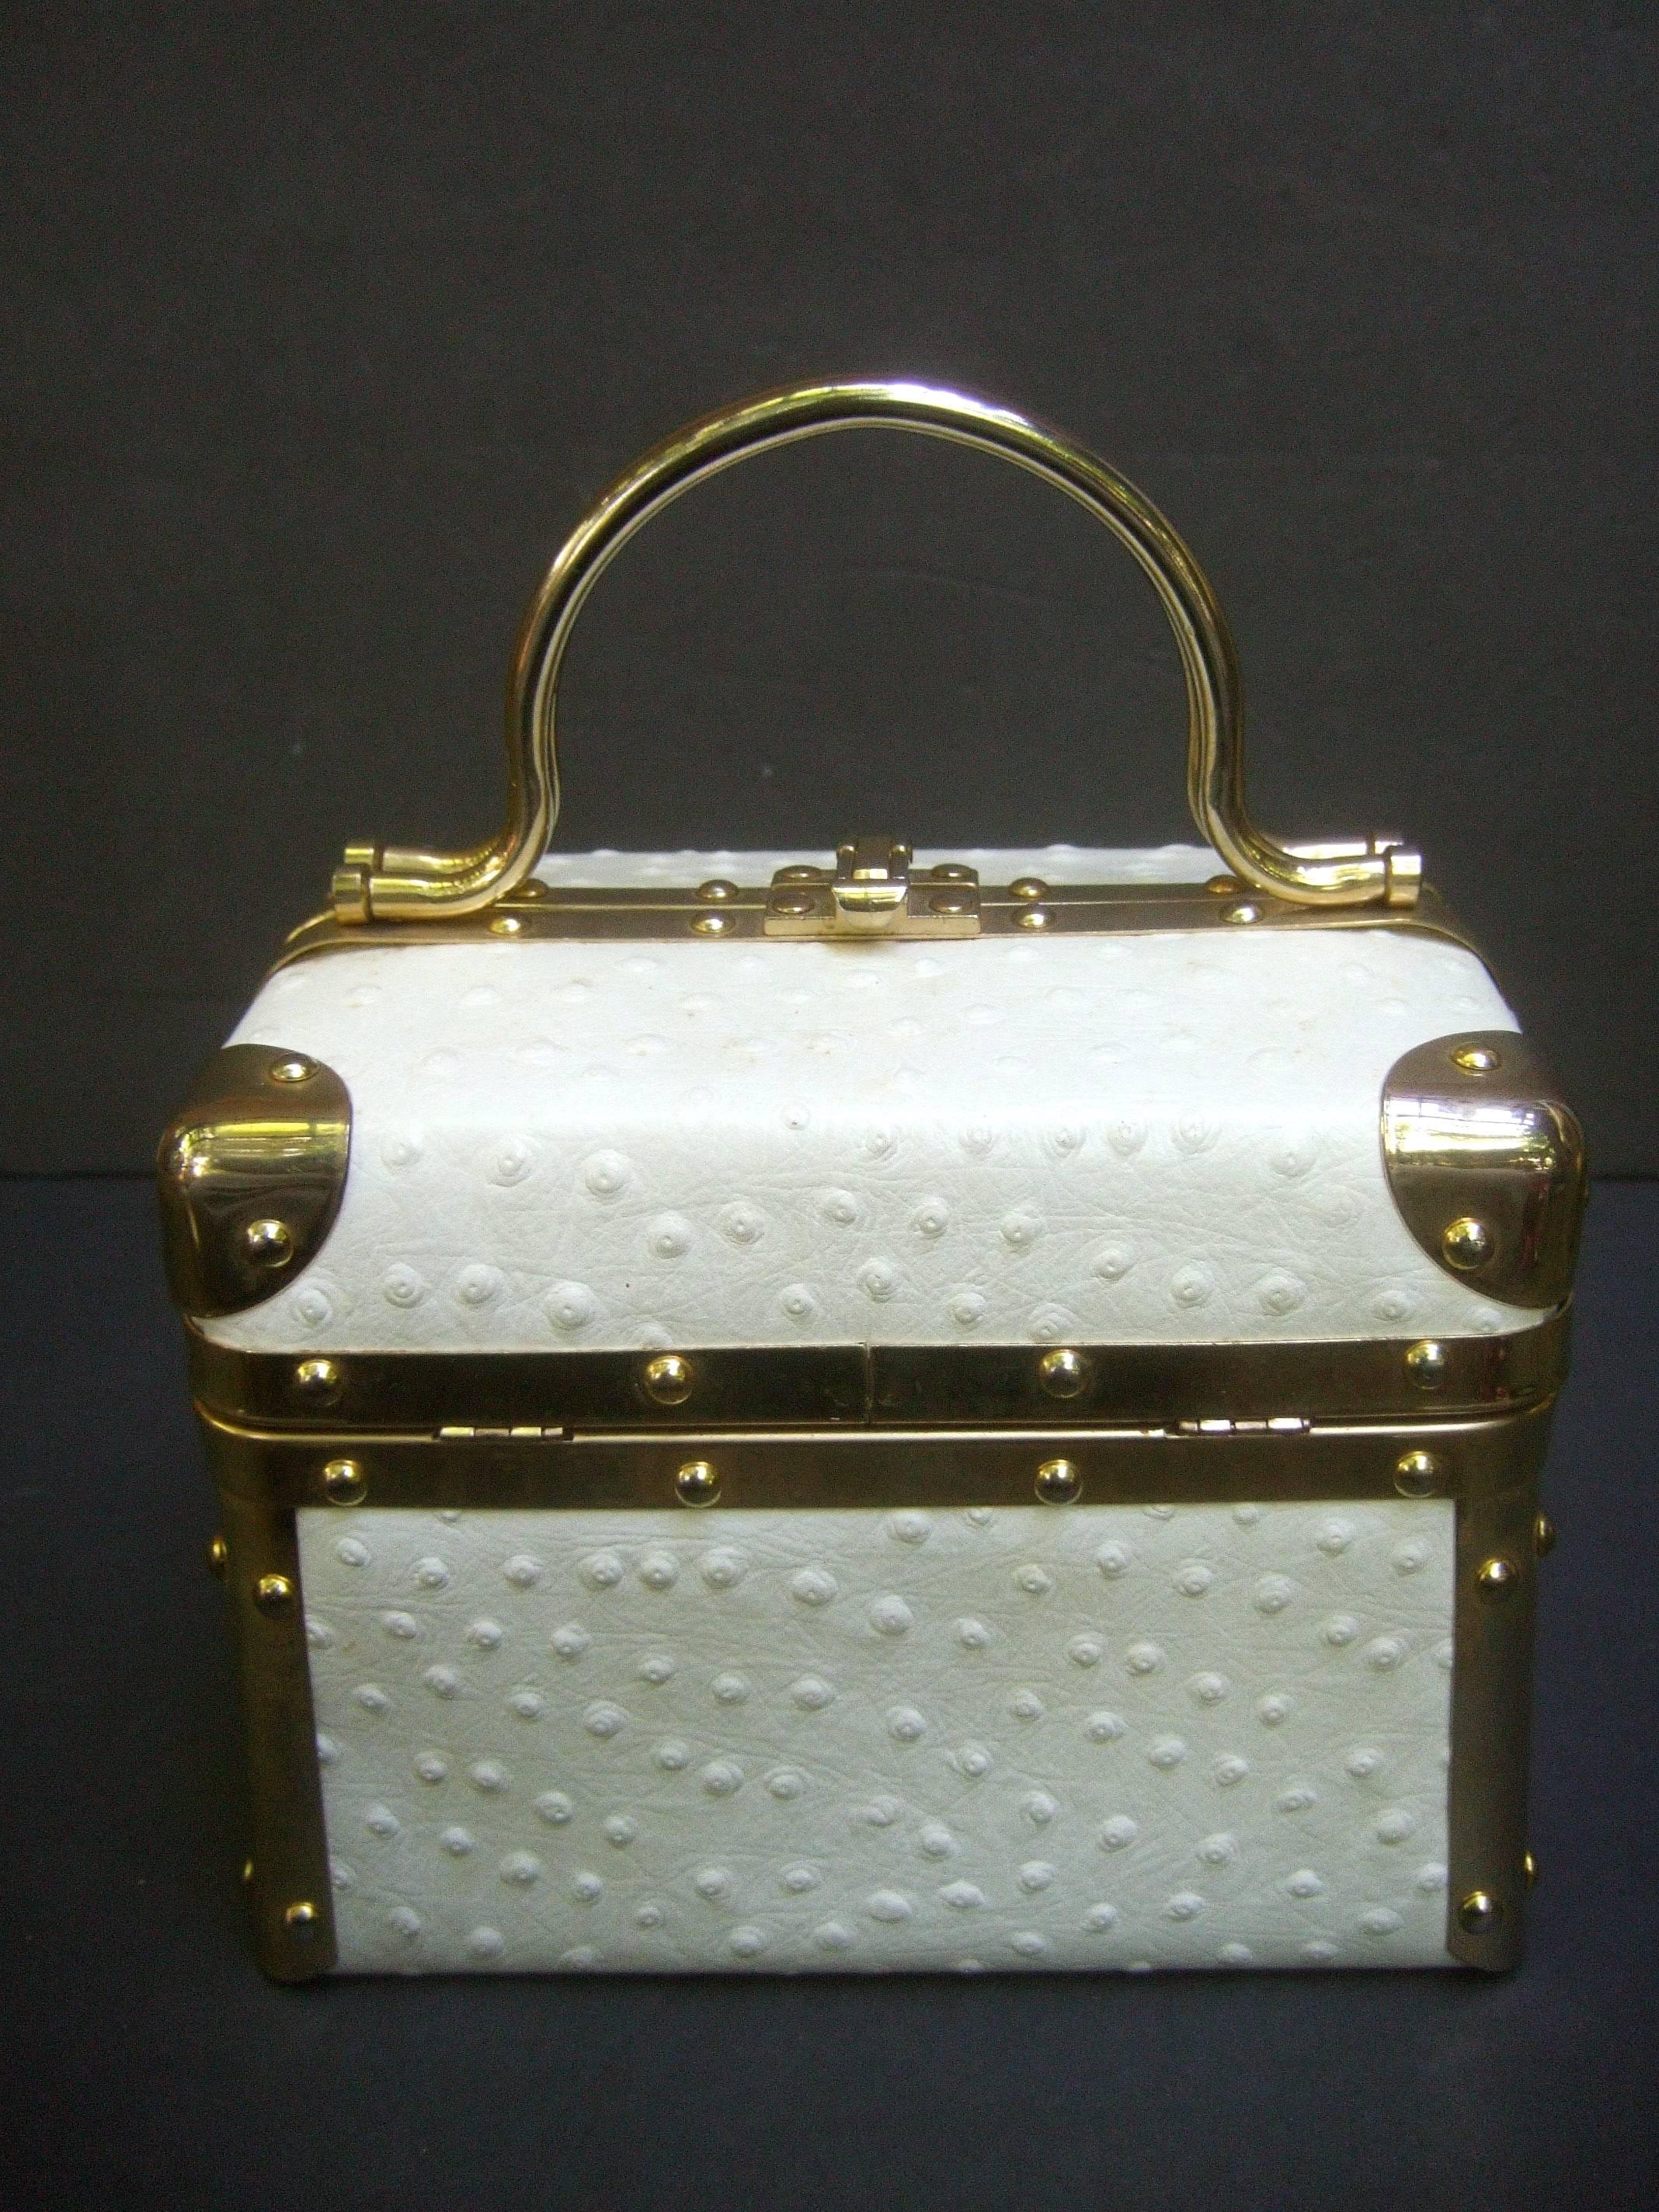 Borsa Bella Italian white ostrich leather box purse c 1980s
The posh Italian handbag is covered with exotic
white ostrich leather on all sides 

Designed with sleek gilt metal hardware trim with metal
swivel handles. The interior is lined in brown